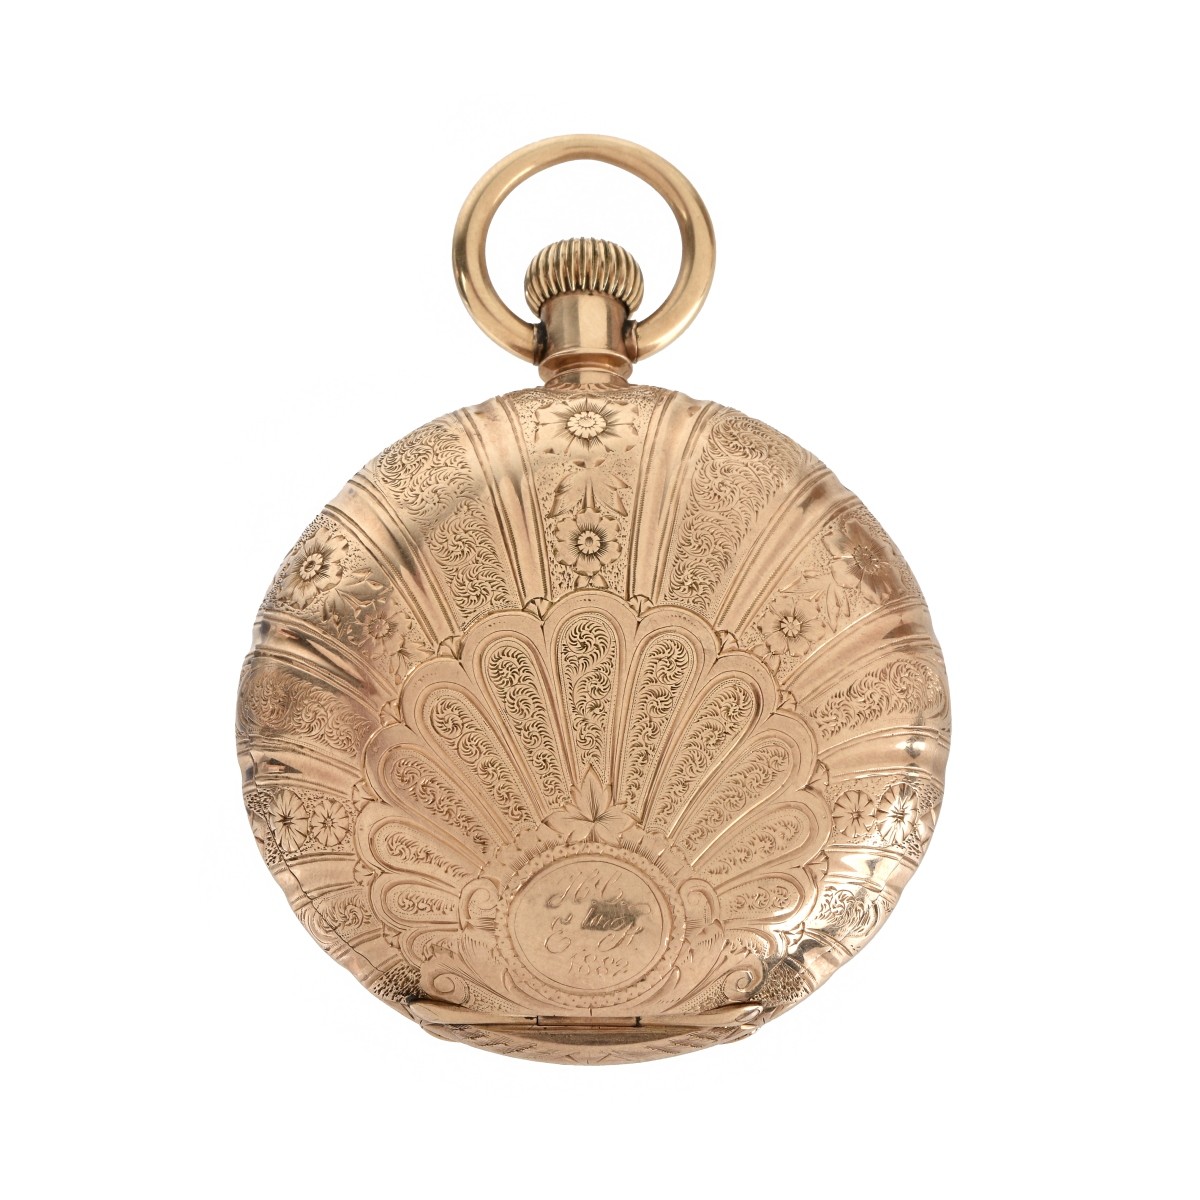 From a large collection of gold pocket watches